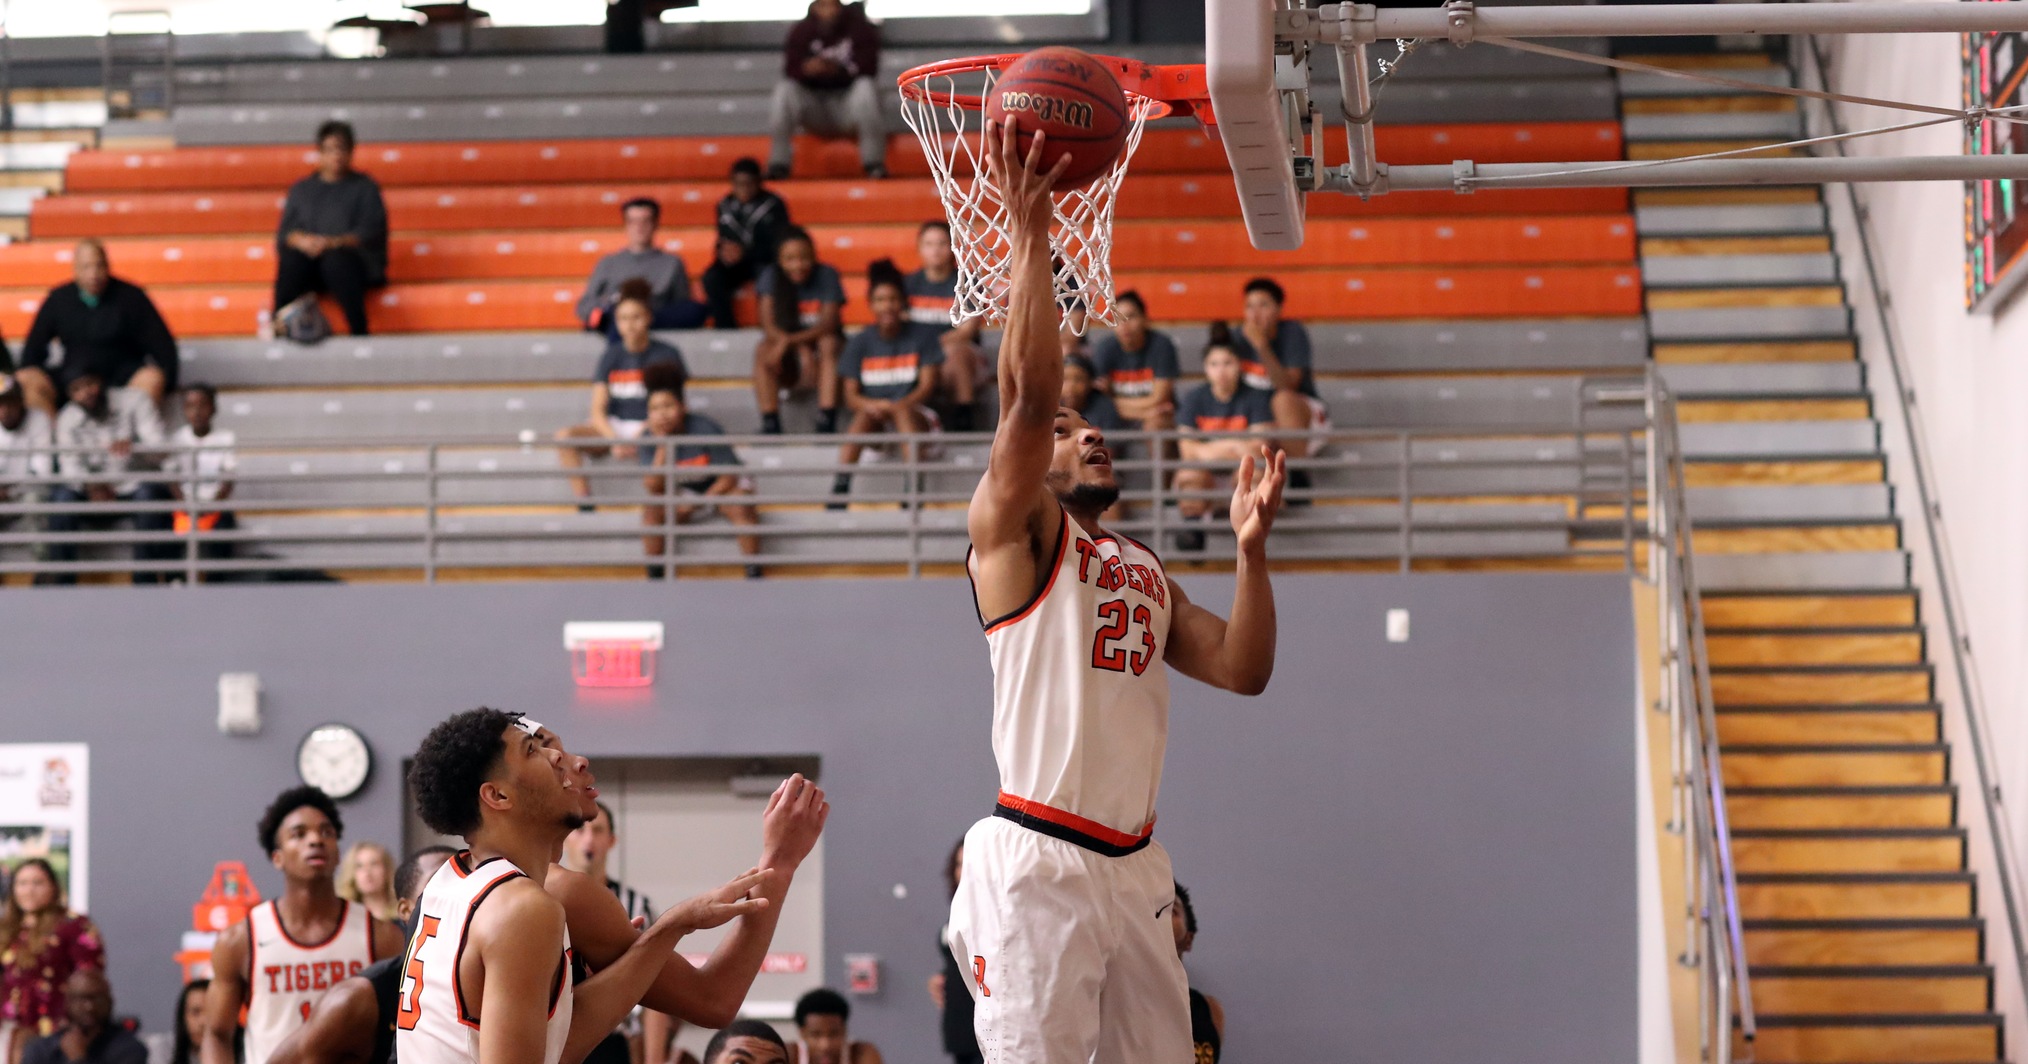 Chris Harper recorded 13 points and seven rebounds in a victory over Irvine Valley on Friday night. (Photo by Bobby R. Hester)